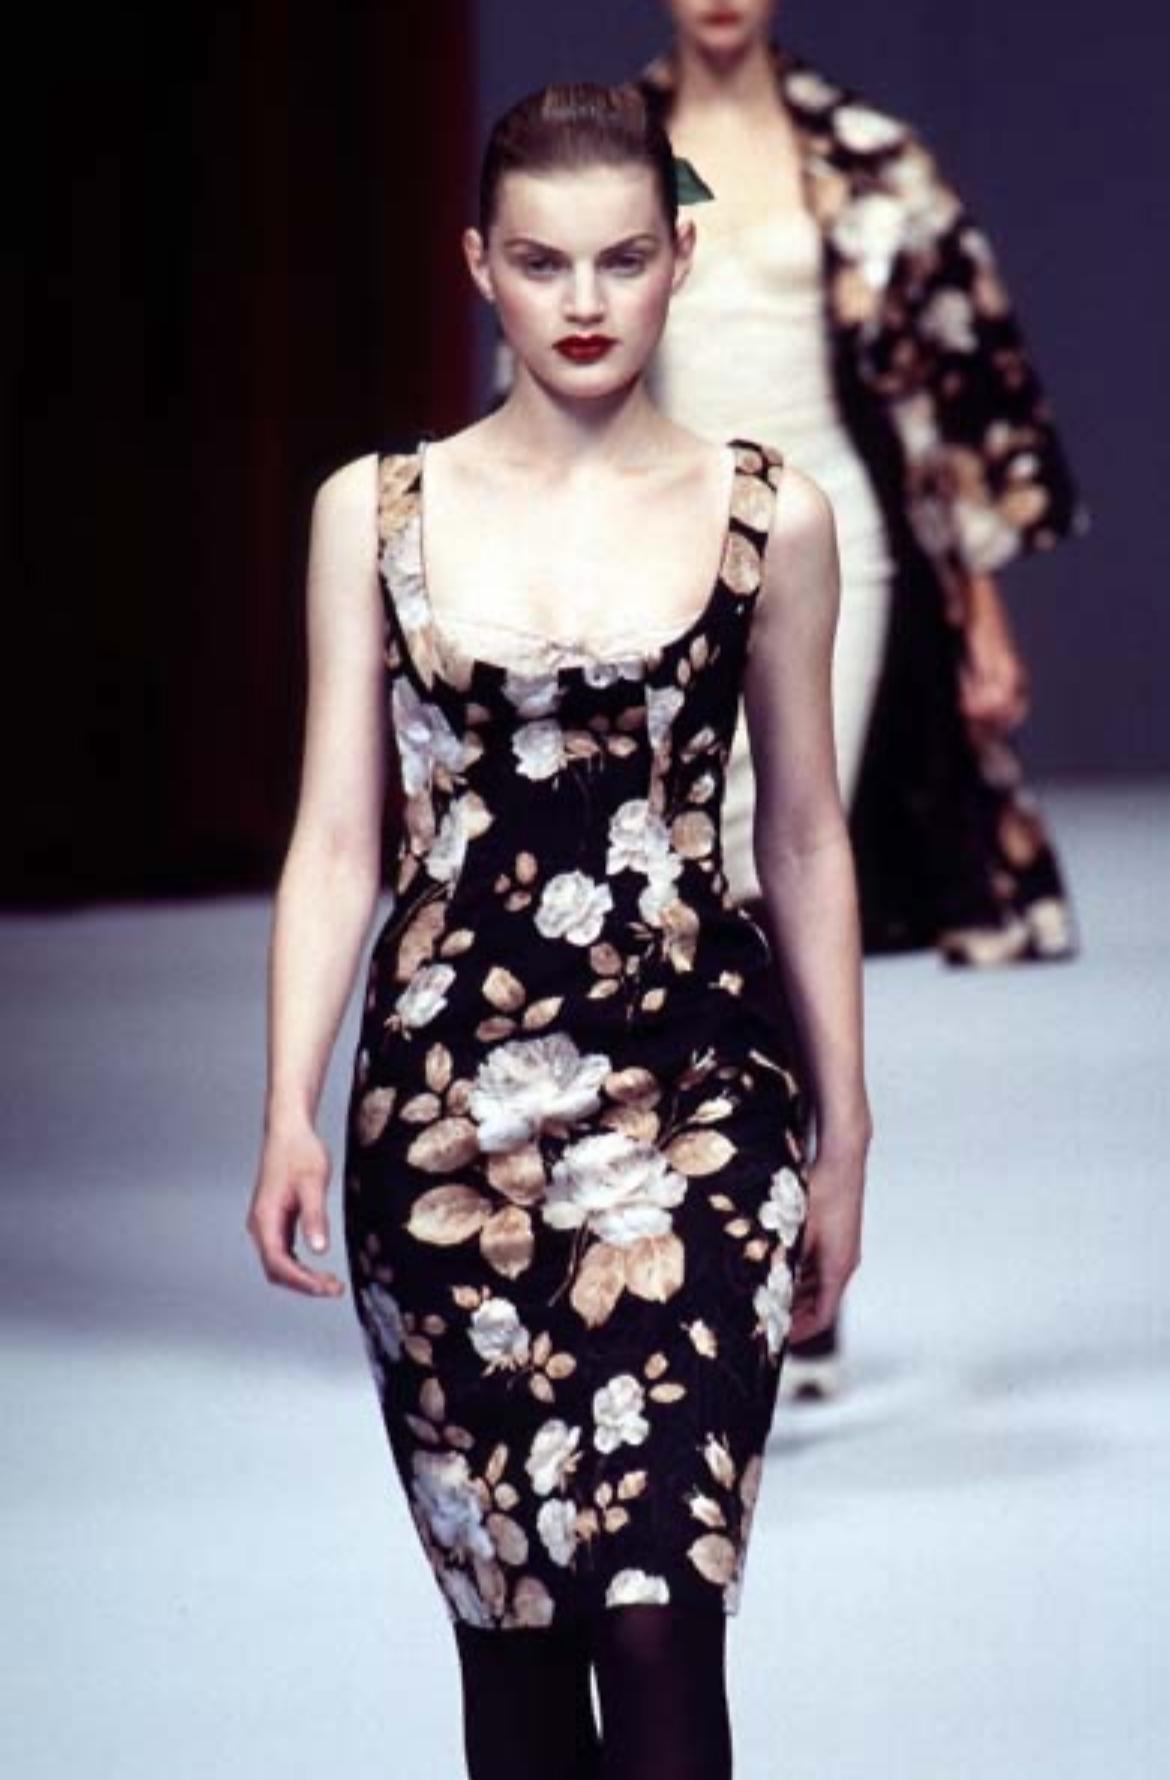 Presenting a tan and black floral skirt by Dolce & Gabbana from the Fall/Winter 1996 collection. This distinctive pattern made its debut on the season's runway. This skirt, cut above the knee, is made from jacquard fabric adorned with a tan rose